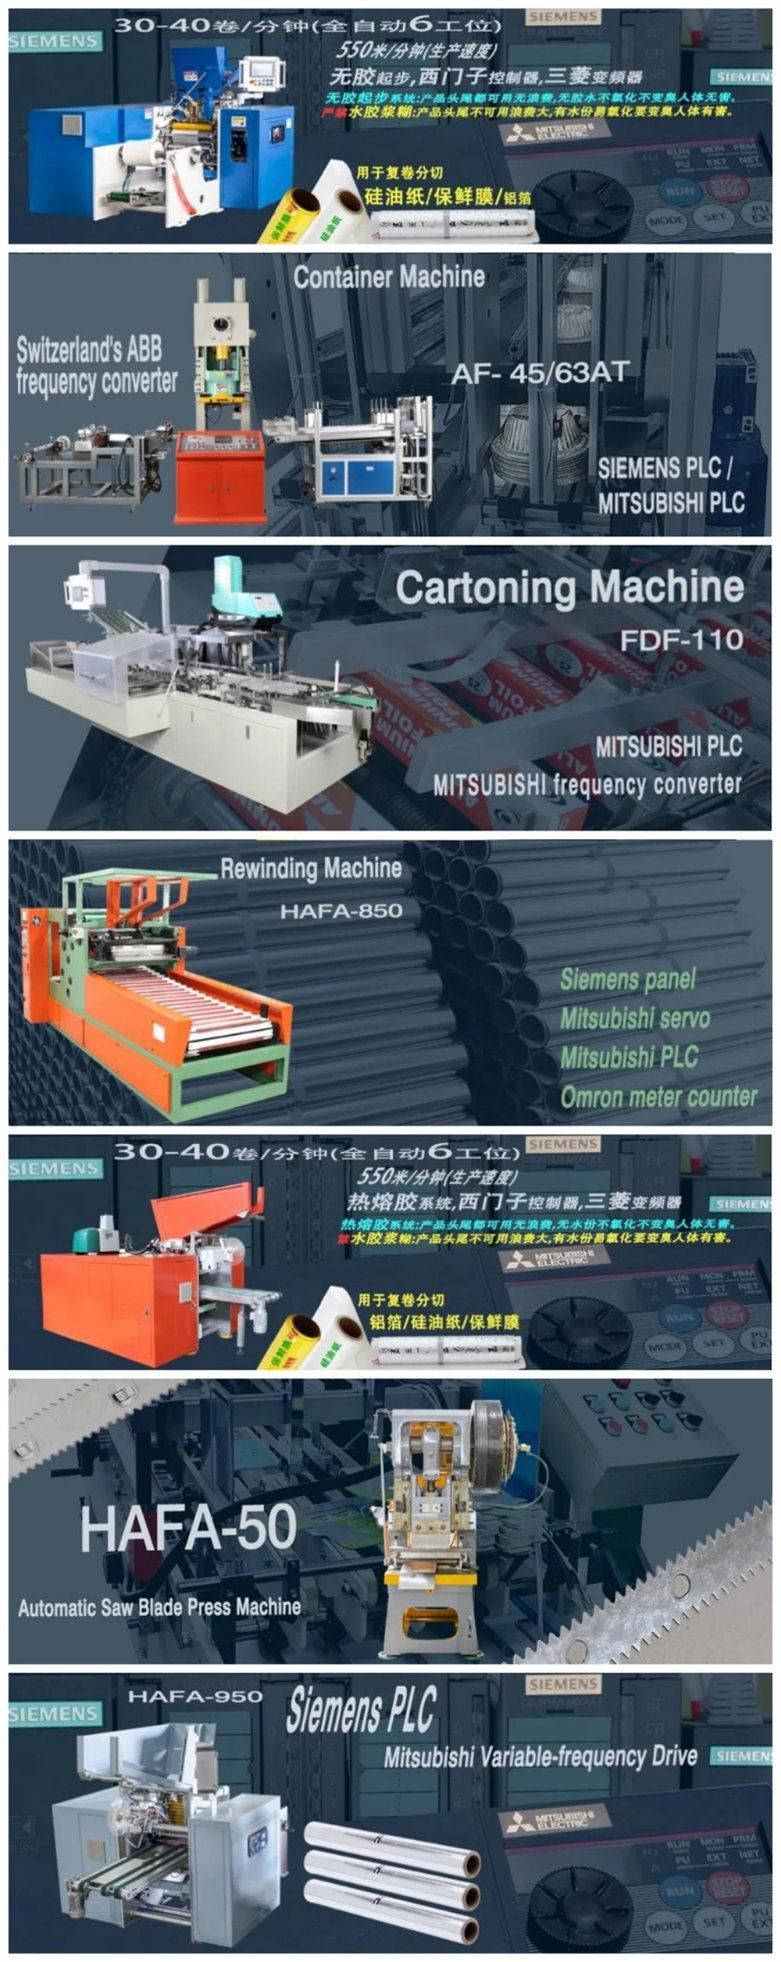 Most Popular Useful and High Quality 45t Aluminum Foil Container Making Machine